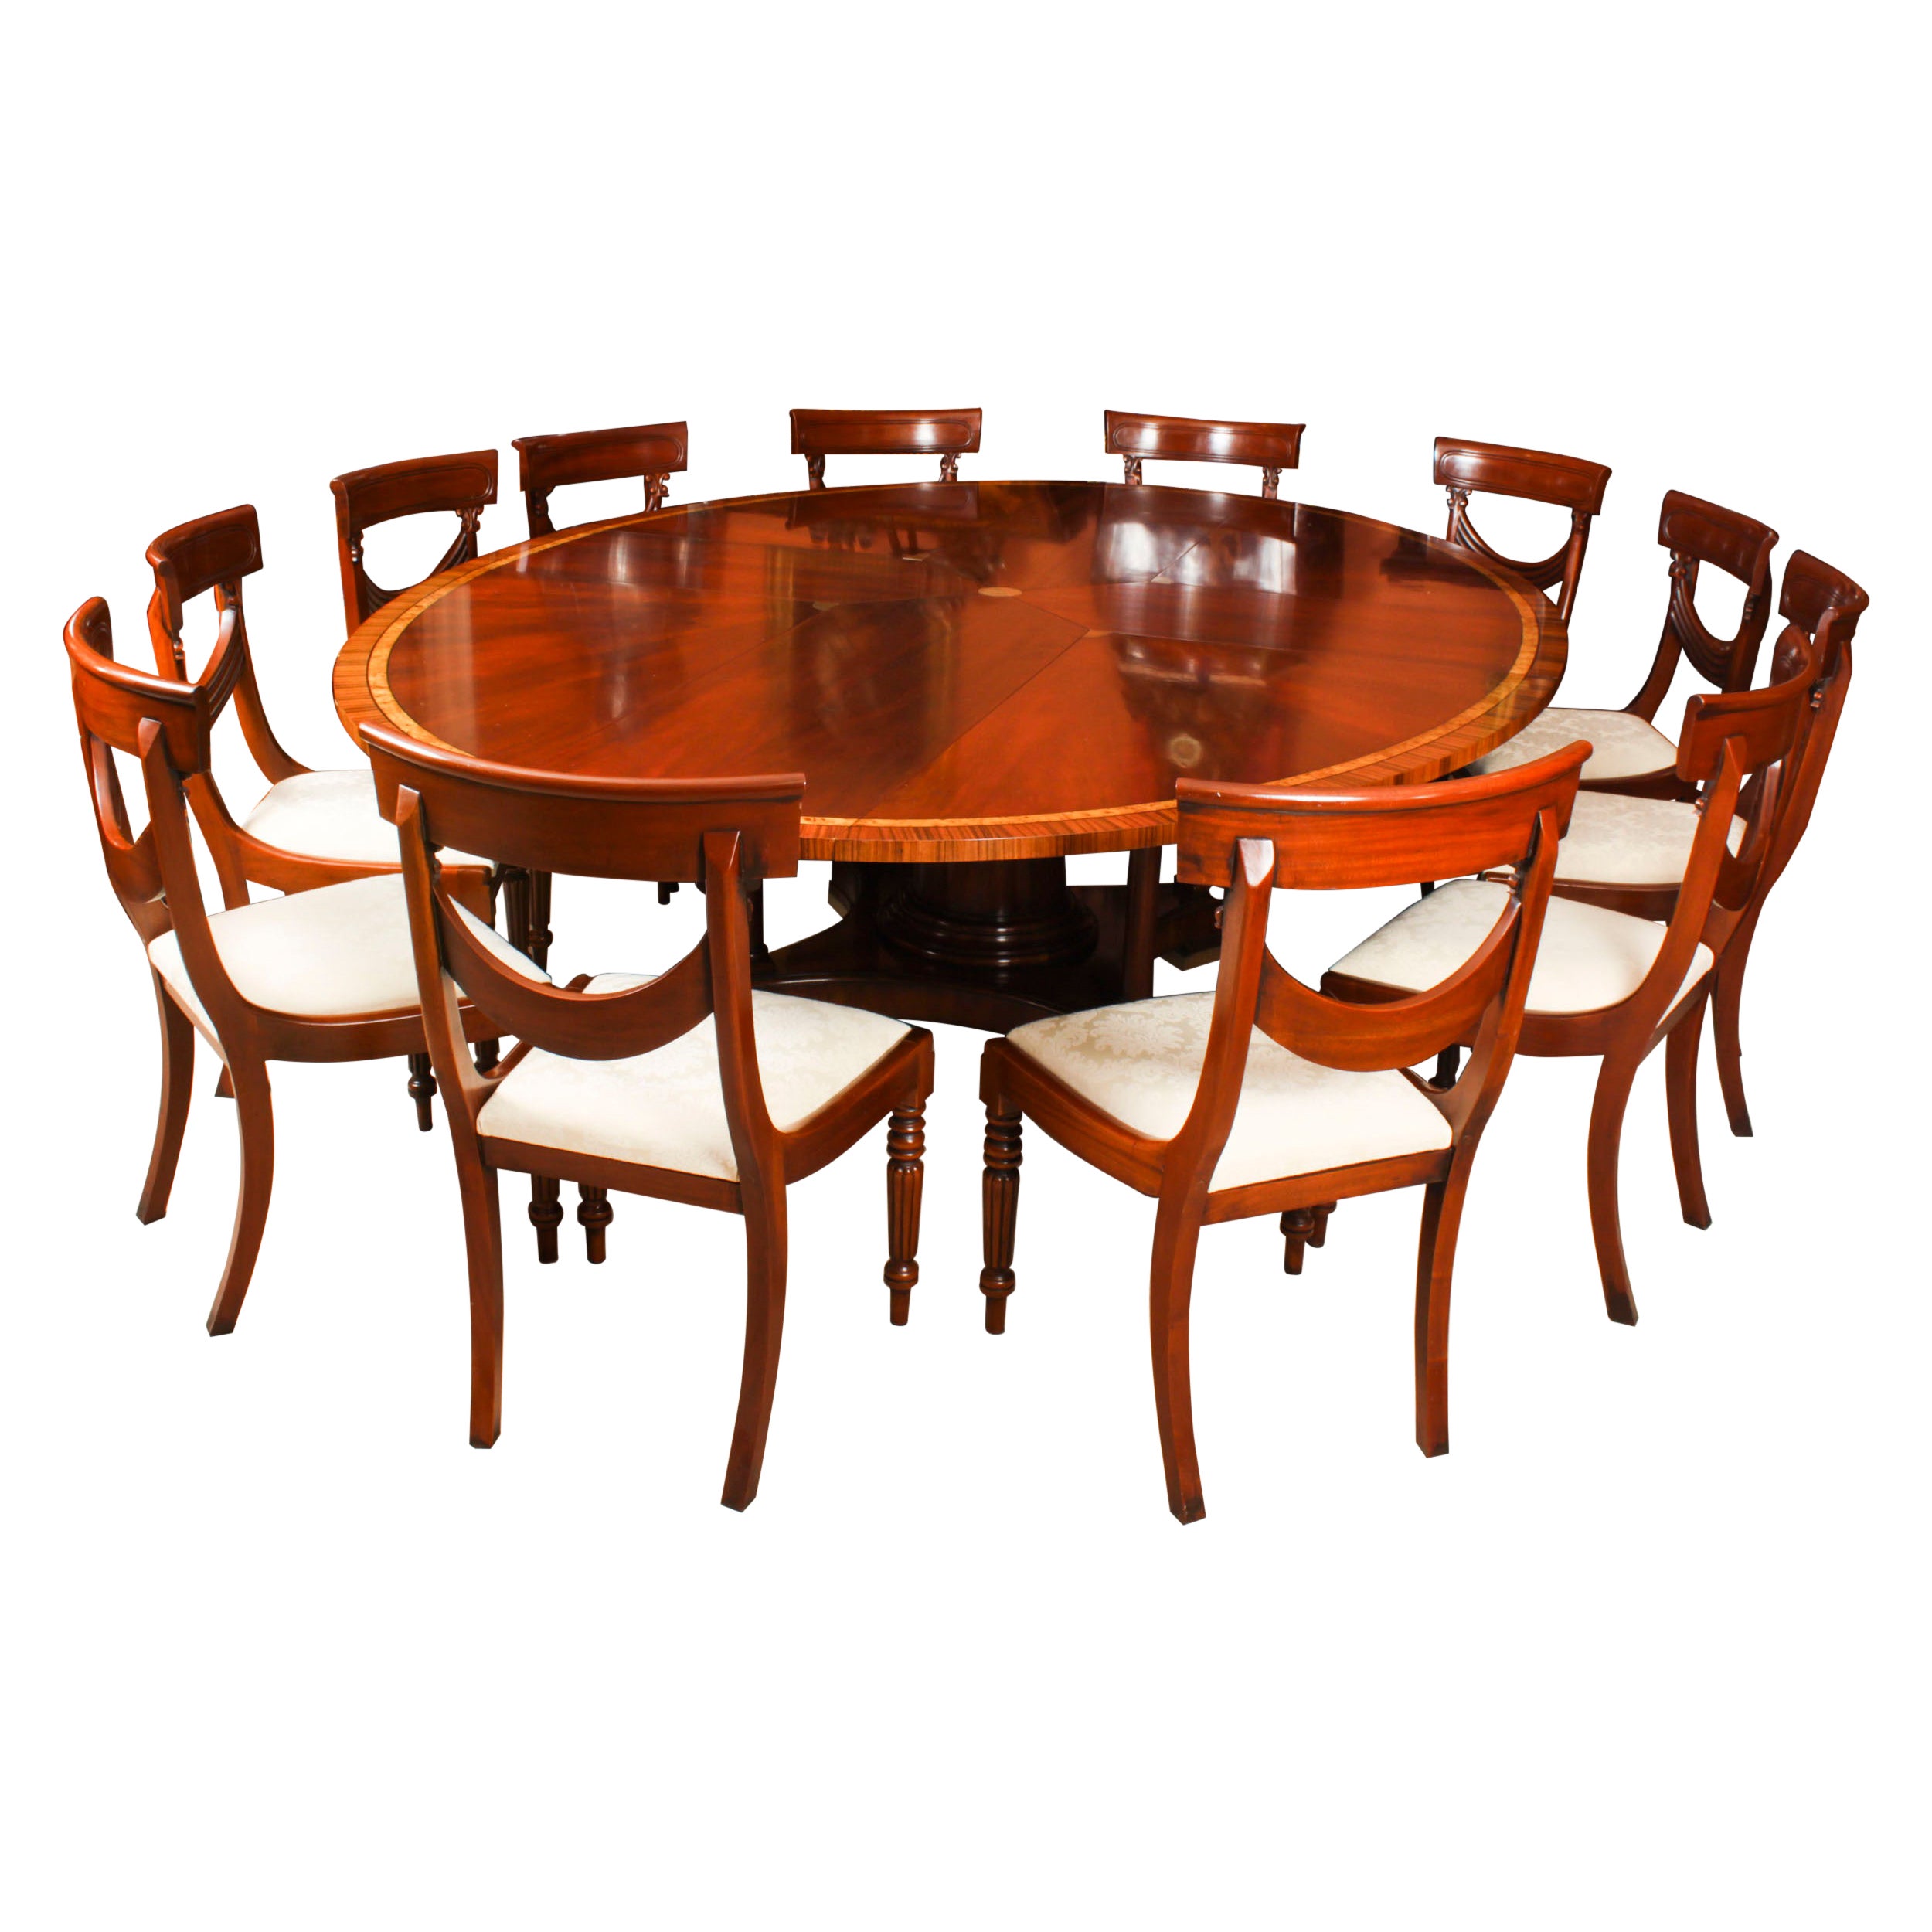 Vintage 9ftx6ft3" Oval Flame Mahogany Jupe Dining Table & 12 chairs 20th Century